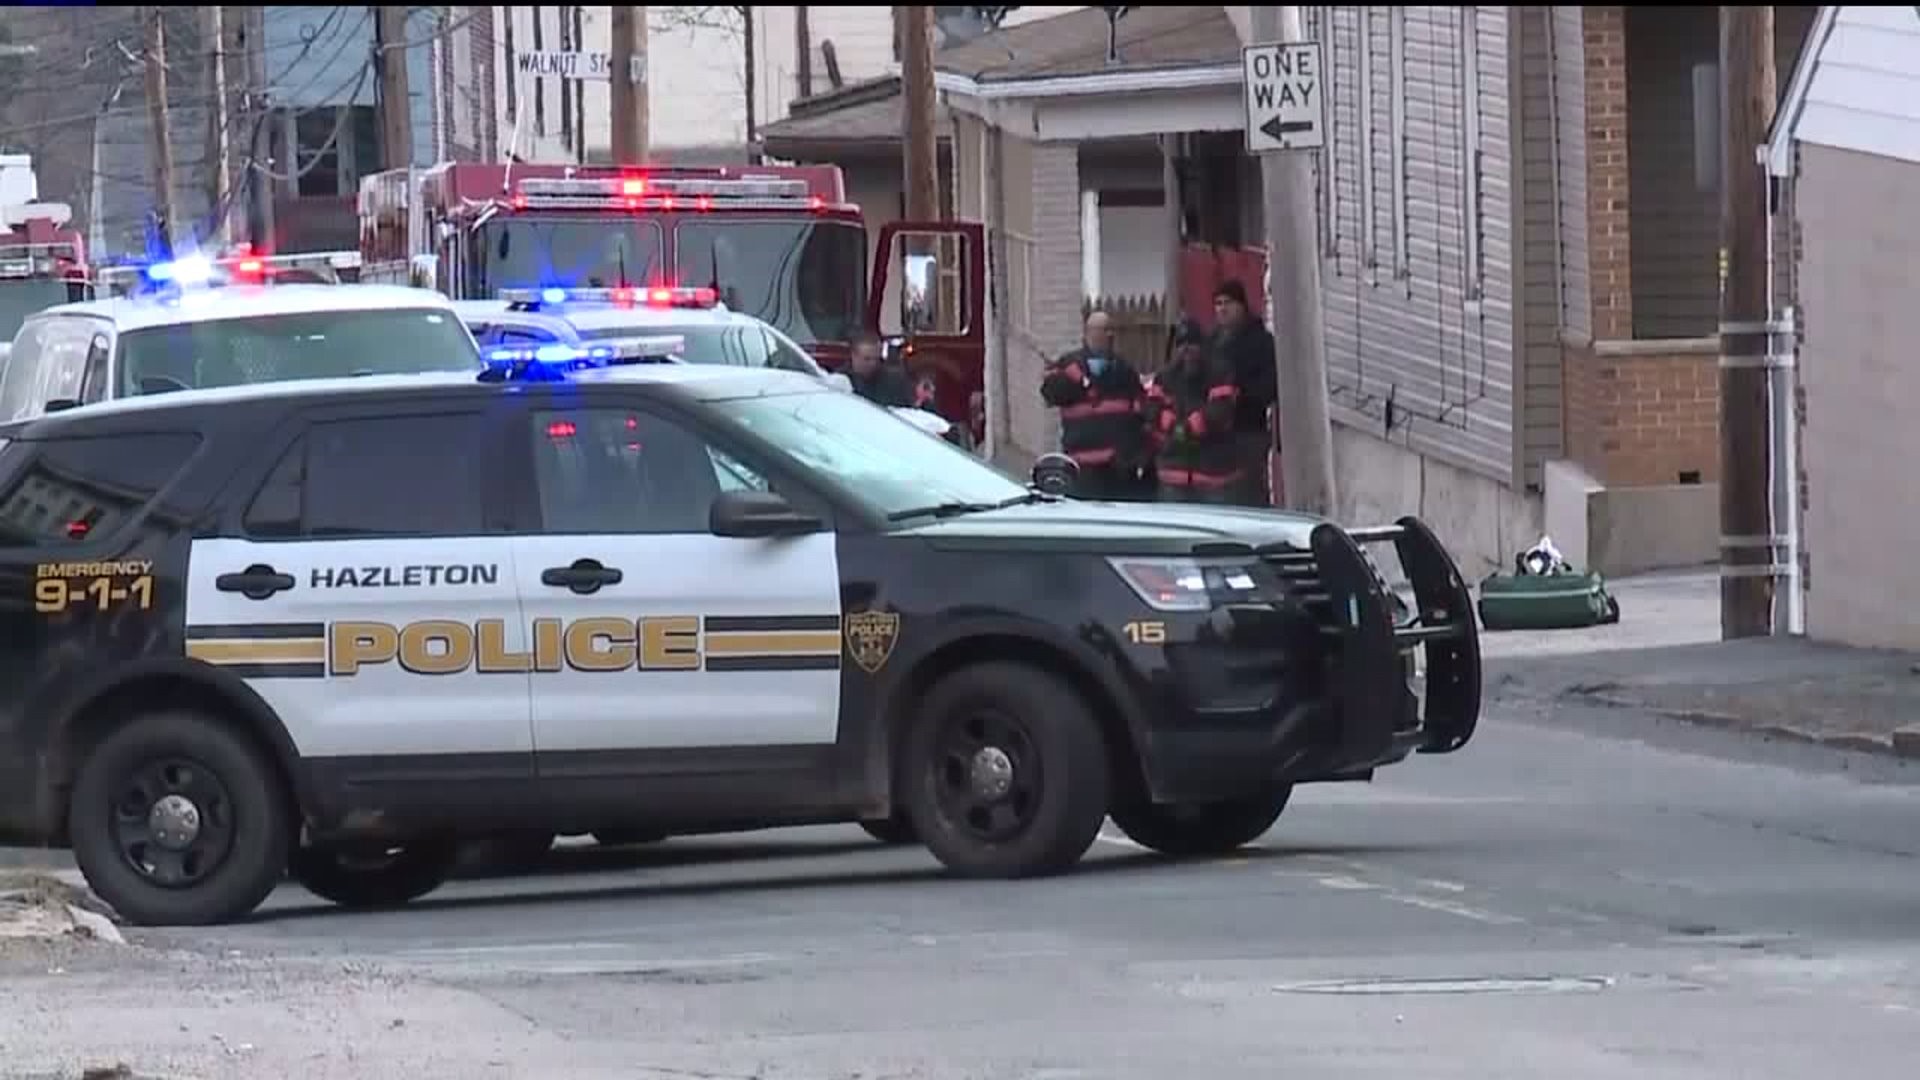 Standoff and Gunfire Incident in Hazleton Ends